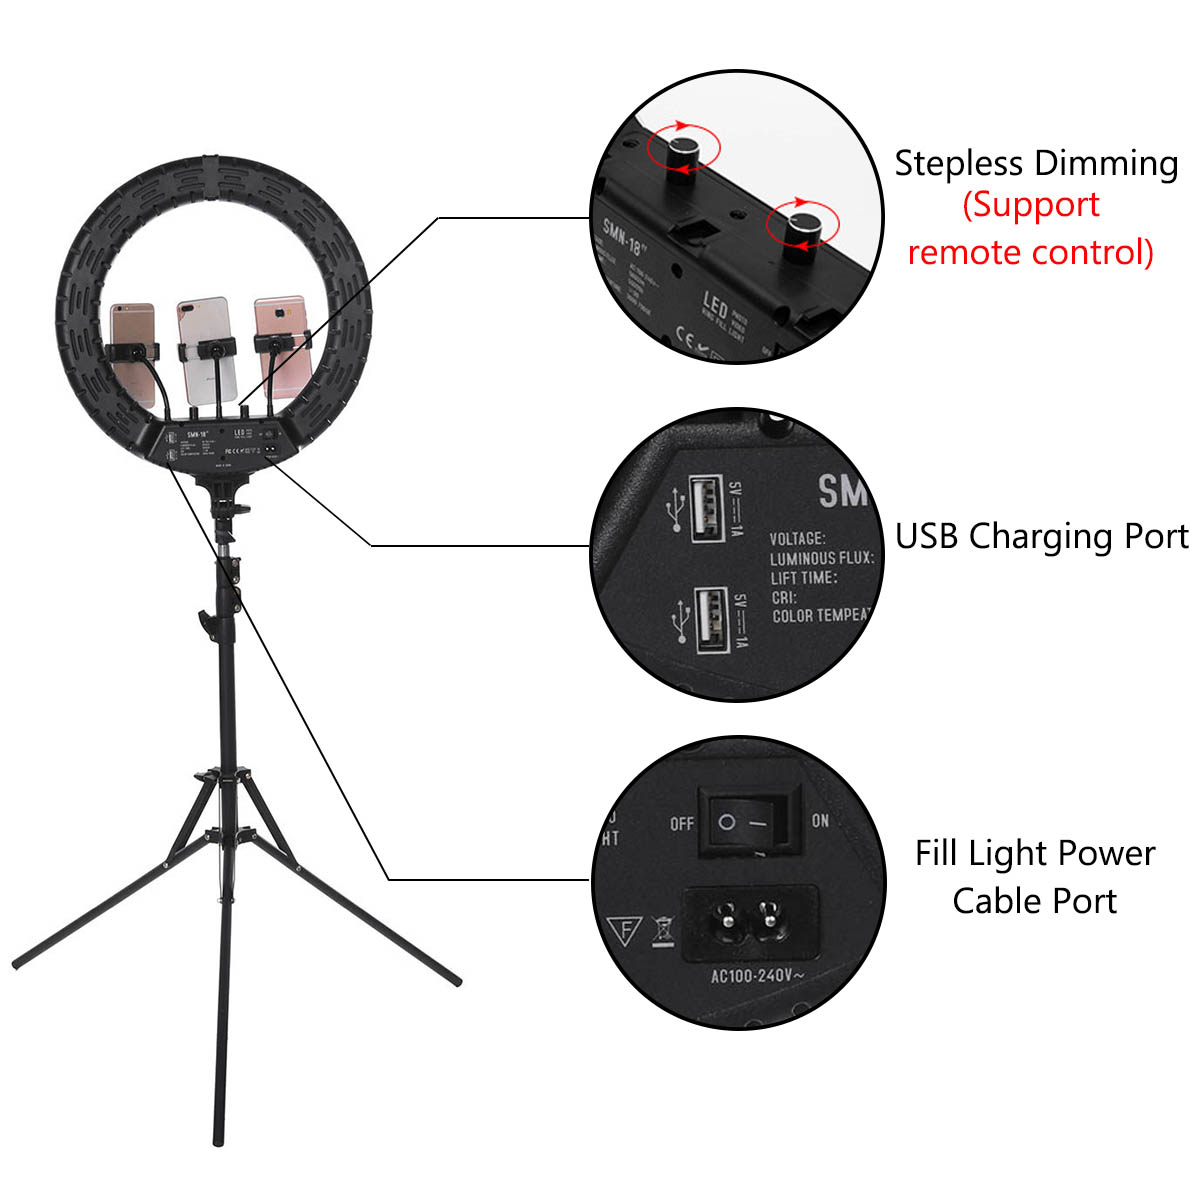 18-inch-LED-Ring-Light-3-Phone-Clip-Dimmable-Fill-Light-with-210cm-Tripod-Stand-Remote-Control-for-Y-1763863